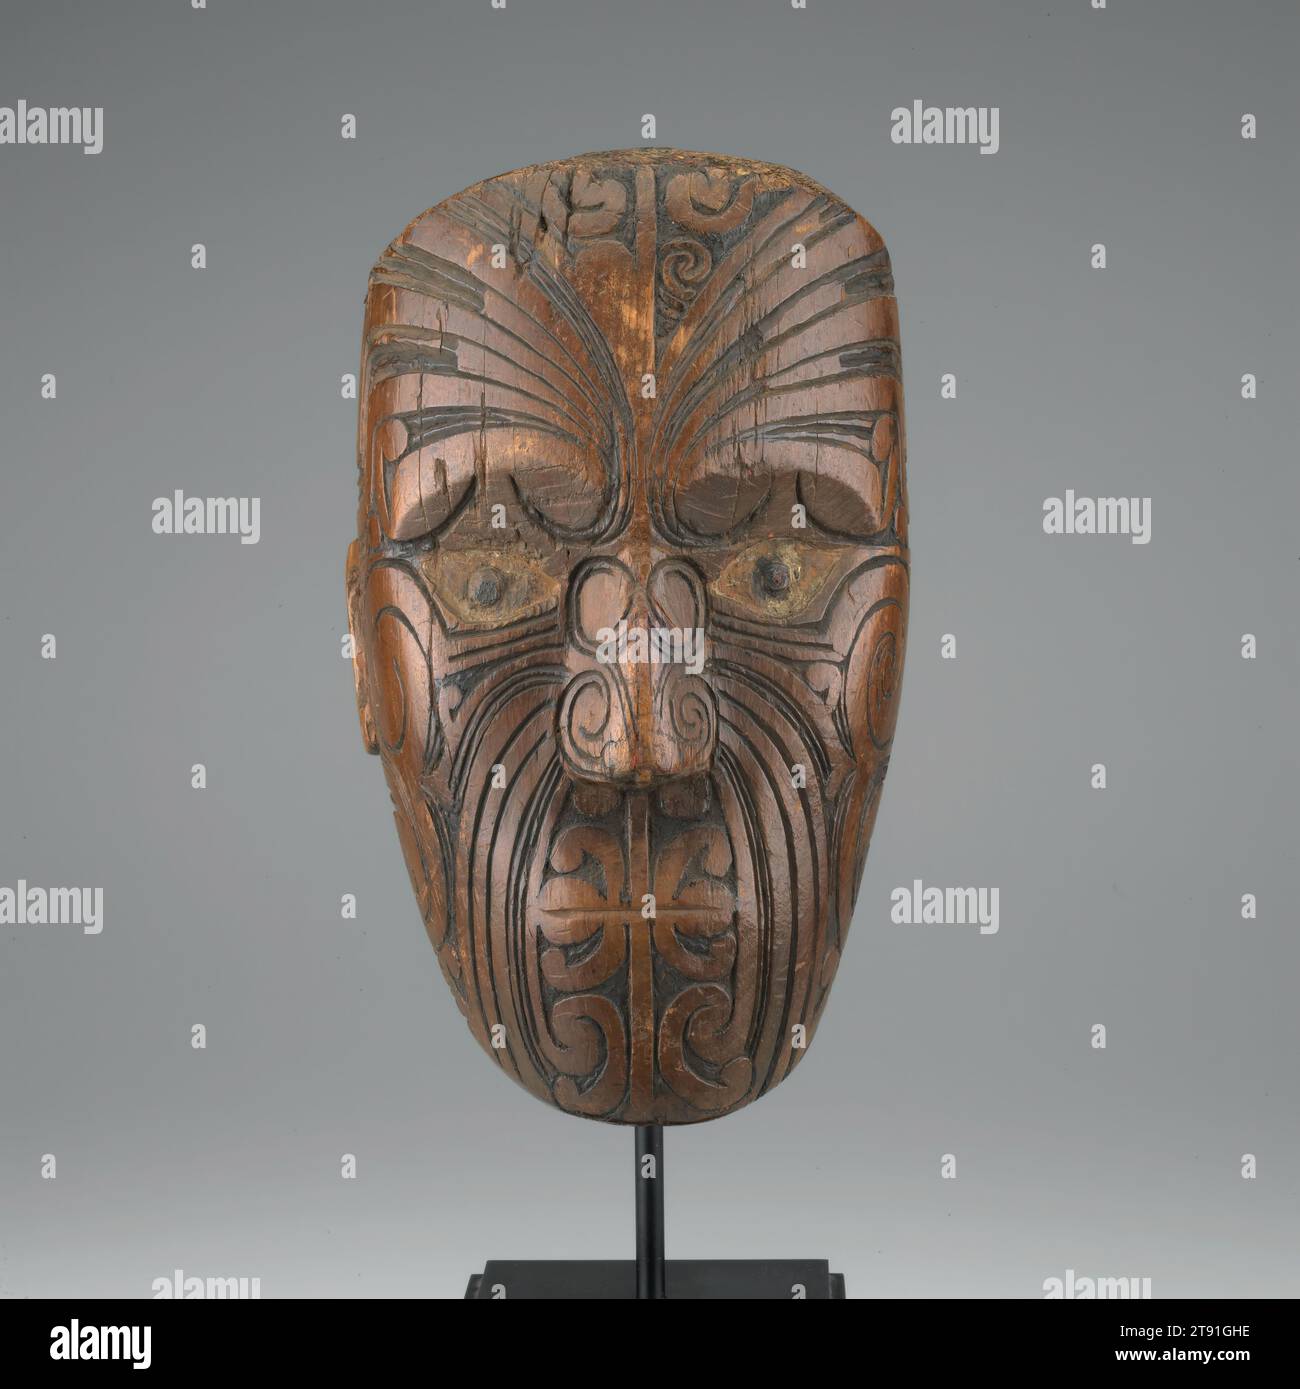 Head, 18th century, 10 9/16 x 6 1/16 x 5 15/16 in. (26.83 x 15.4 x 15.08 cm) (head only), Wood, New Zealand, 18th century, Elaborately carved heads such as this one were mounted on poles and used to mark territorial boundaries. Called rahui, each head served as a warning to trepassers that they were entering the land of another clan. The face is carved into a stern, serious expression, befitting its role as a cautionary signal. It used to have shell inlay in its eyes, which gave them lifelike flash and fire Stock Photo